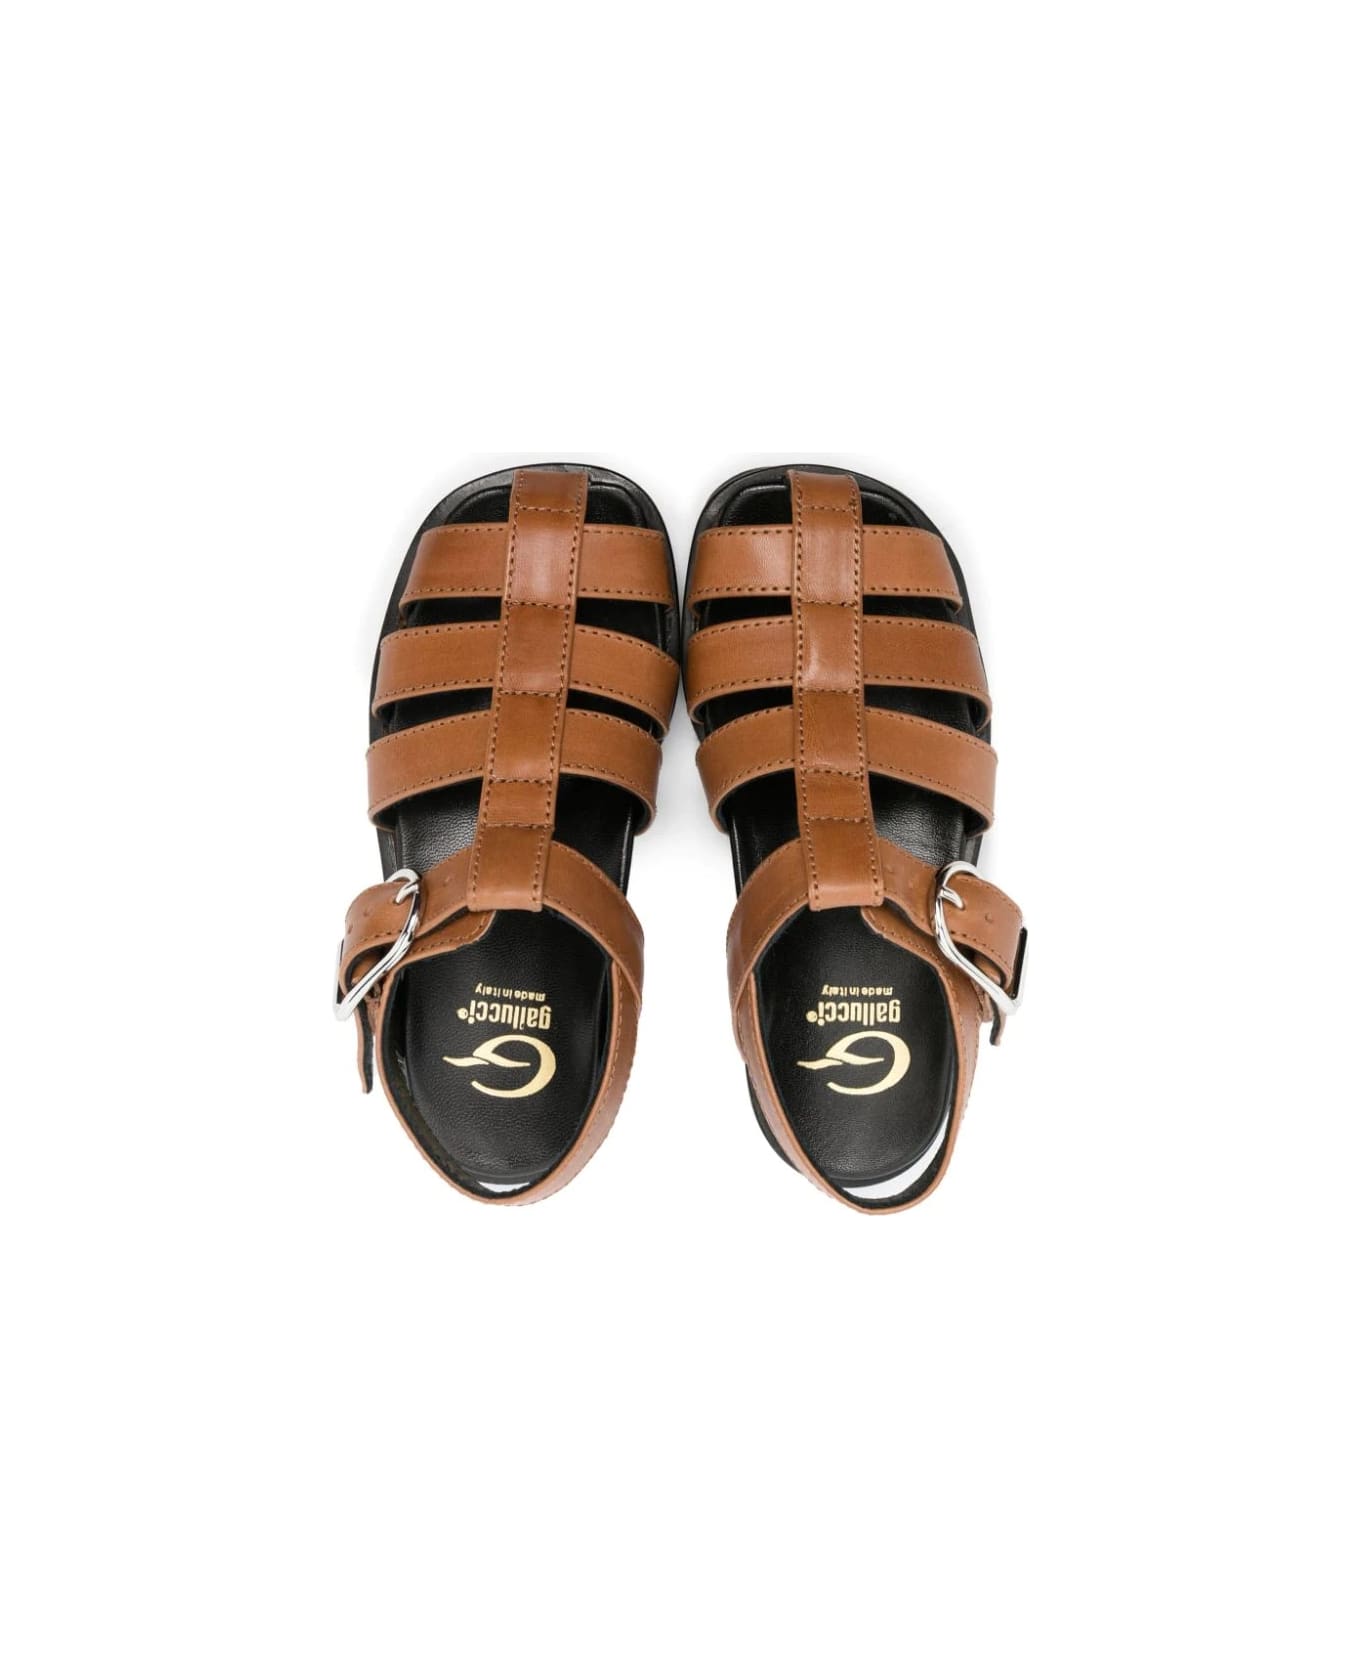 Gallucci Sandals With Buckle - Brown